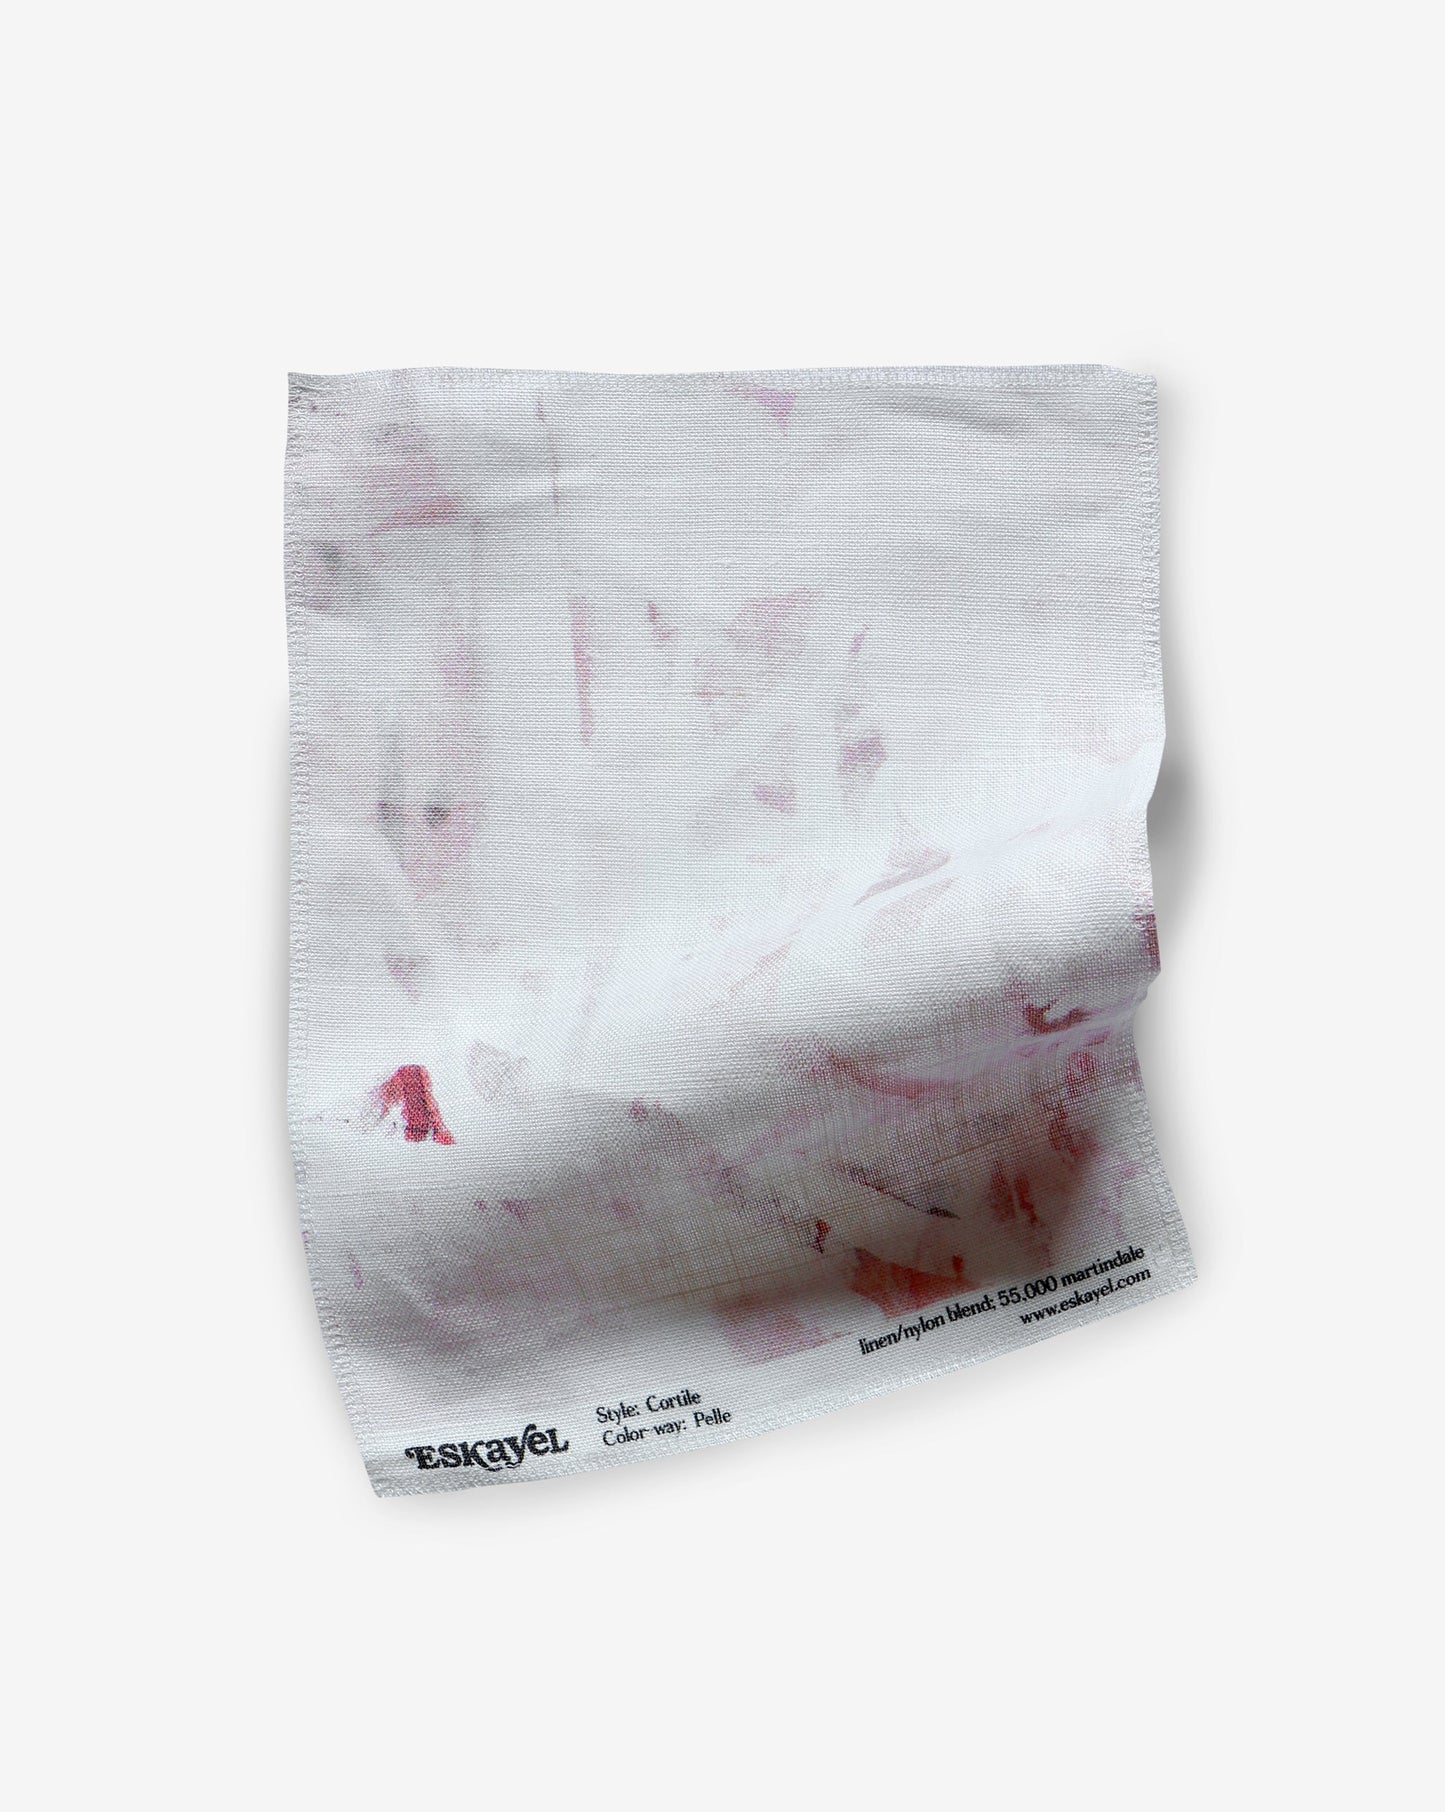 A Cortile Fabric Pelle with blood on it